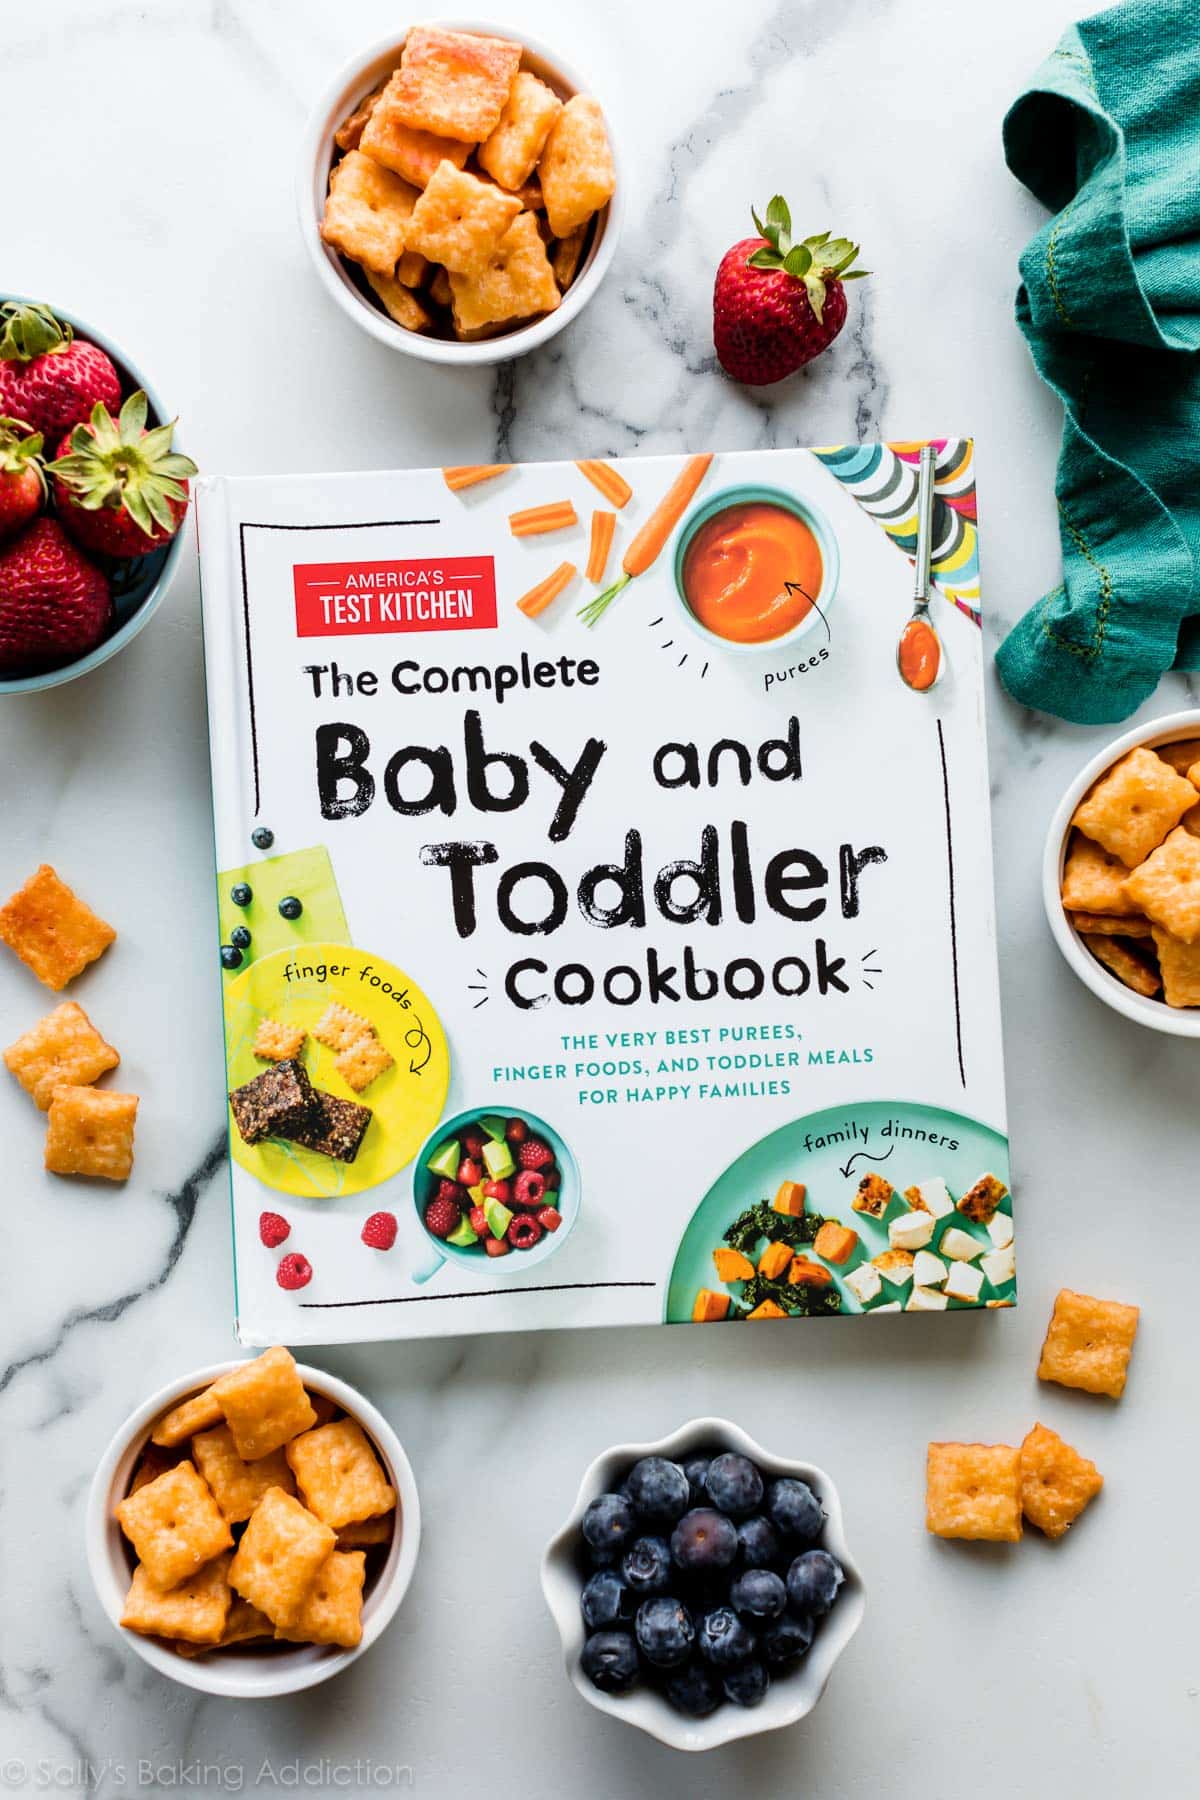 The Complete Baby and Toddler Cookbook by America's Test Kitchen